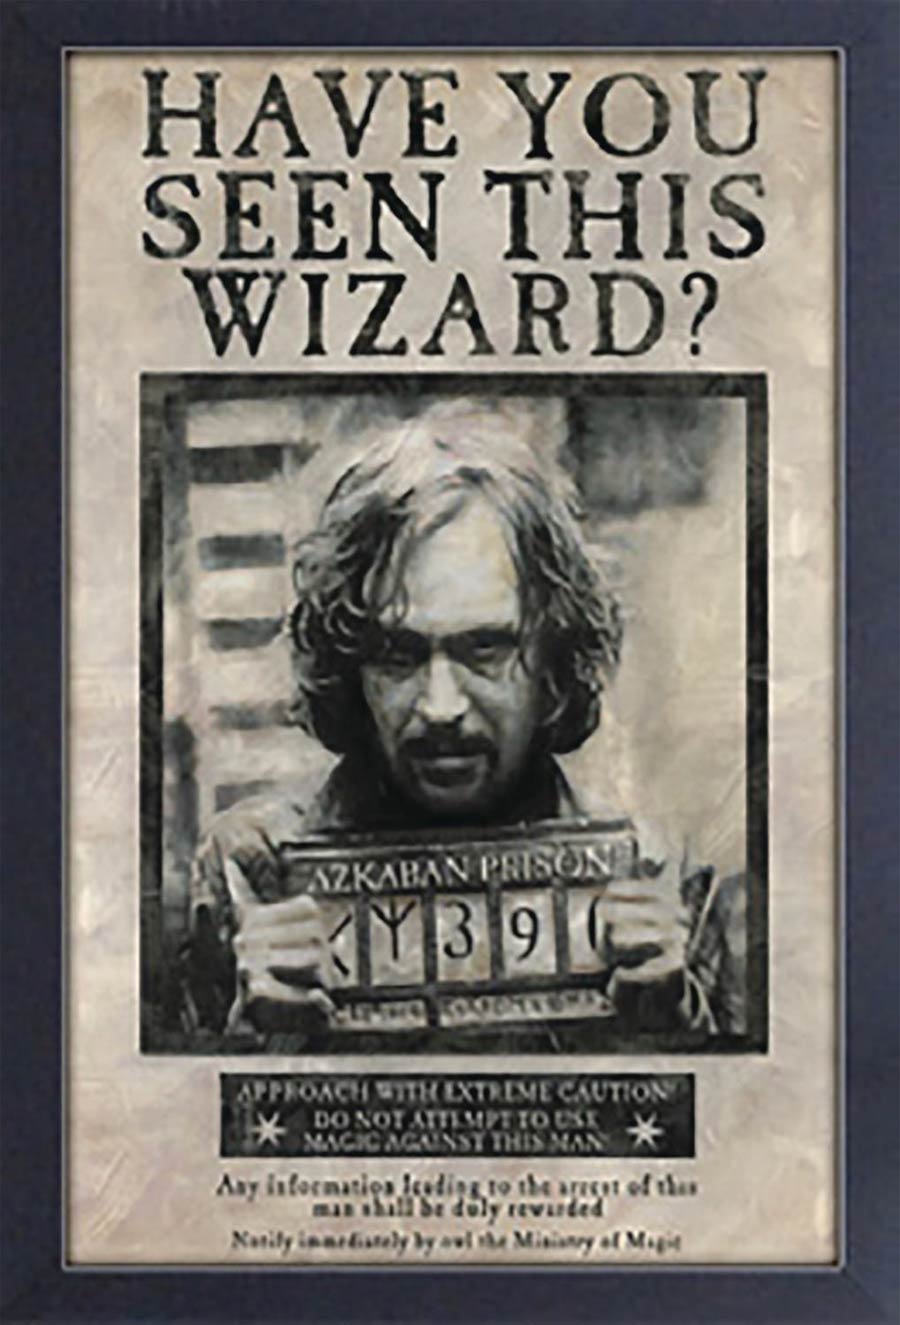 Harry Potter 11x17 Framed Print - Sirius Black Wanted Poster